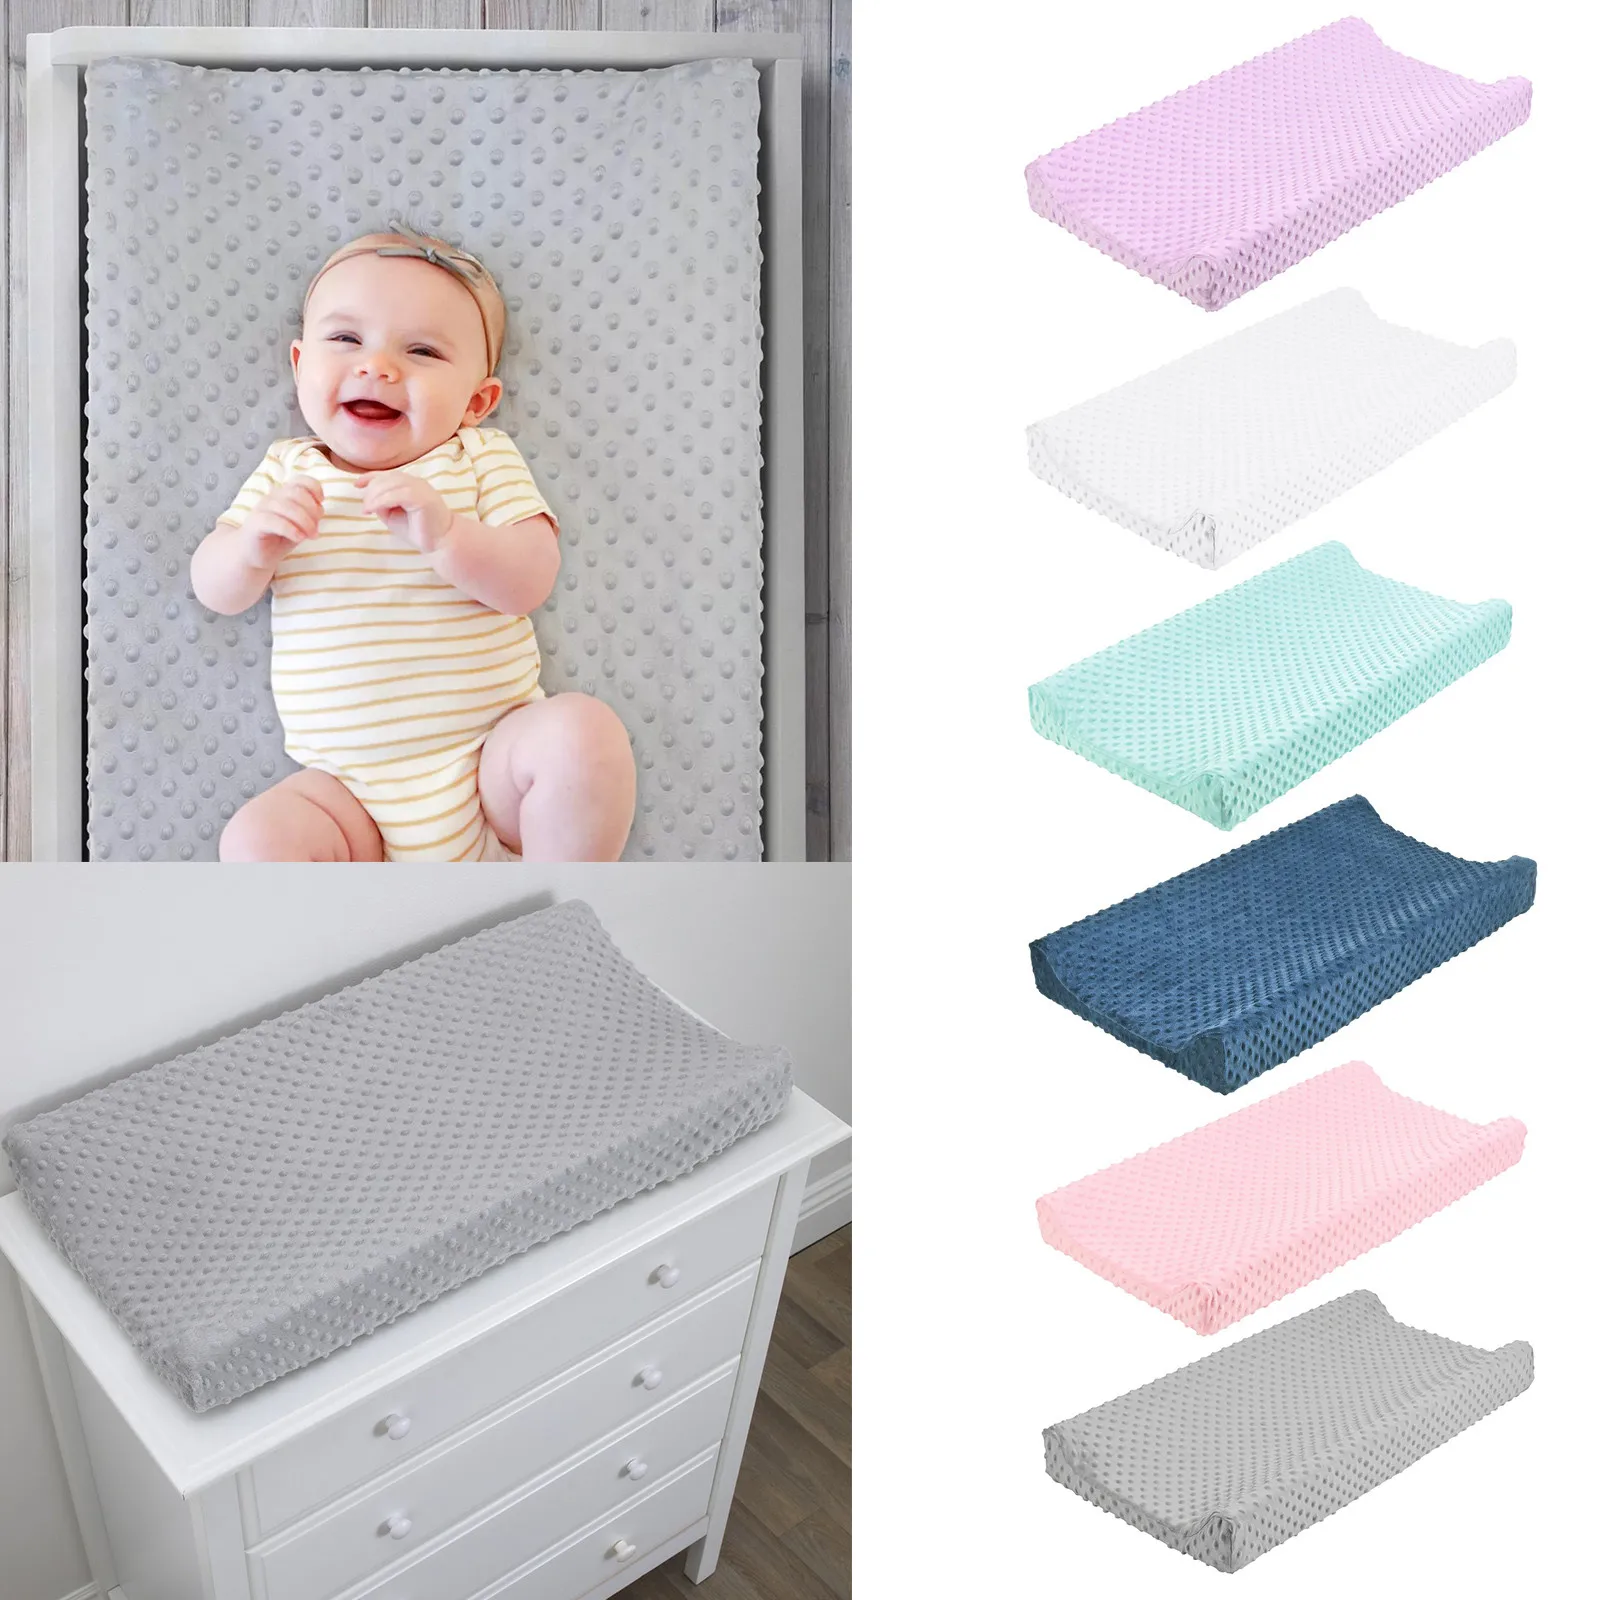 HS 32CMx16CMx4CM Baby Nursery Baby Infant Diaper Nappy Urine Mat Kid Simple Bedding Changing Cover Pad Sheet Protector Table